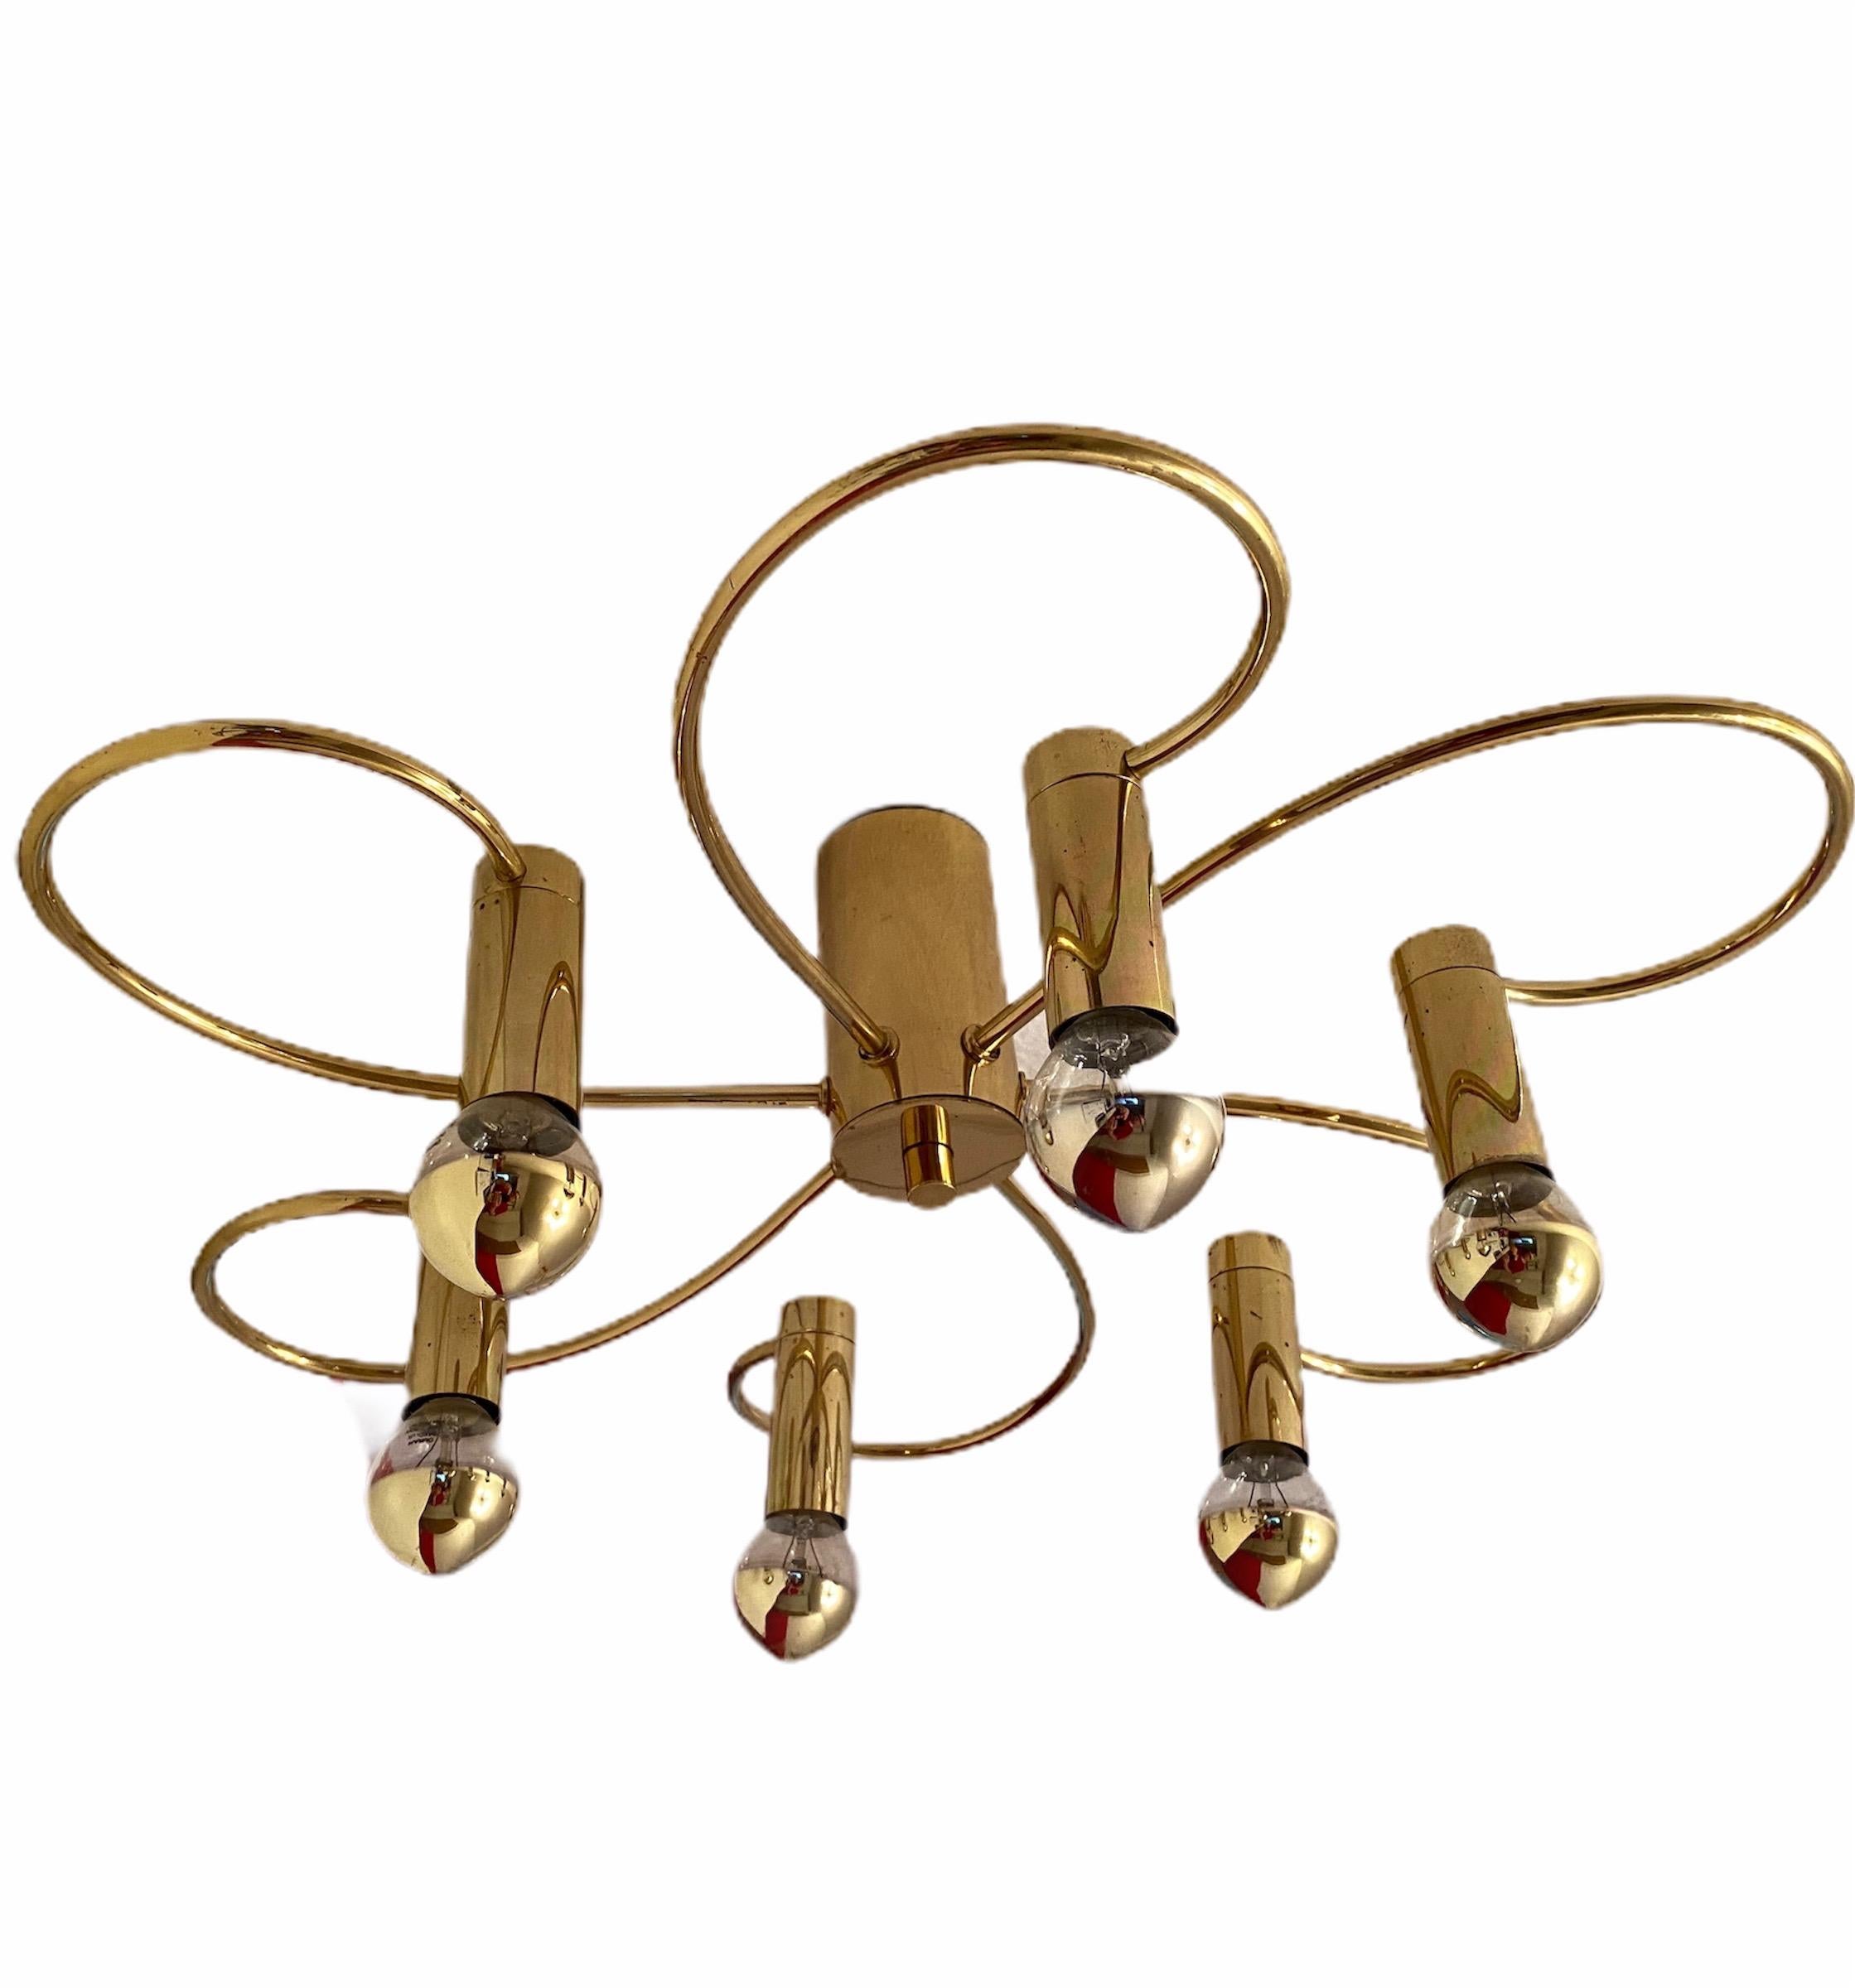 A gorgeous polished brass flush mount by Leola Leuchten. It can be used also as a wall light. The light fixture requires six European E14 light bulbs, each up to 40 watts. It measures approximate: 6 3/4